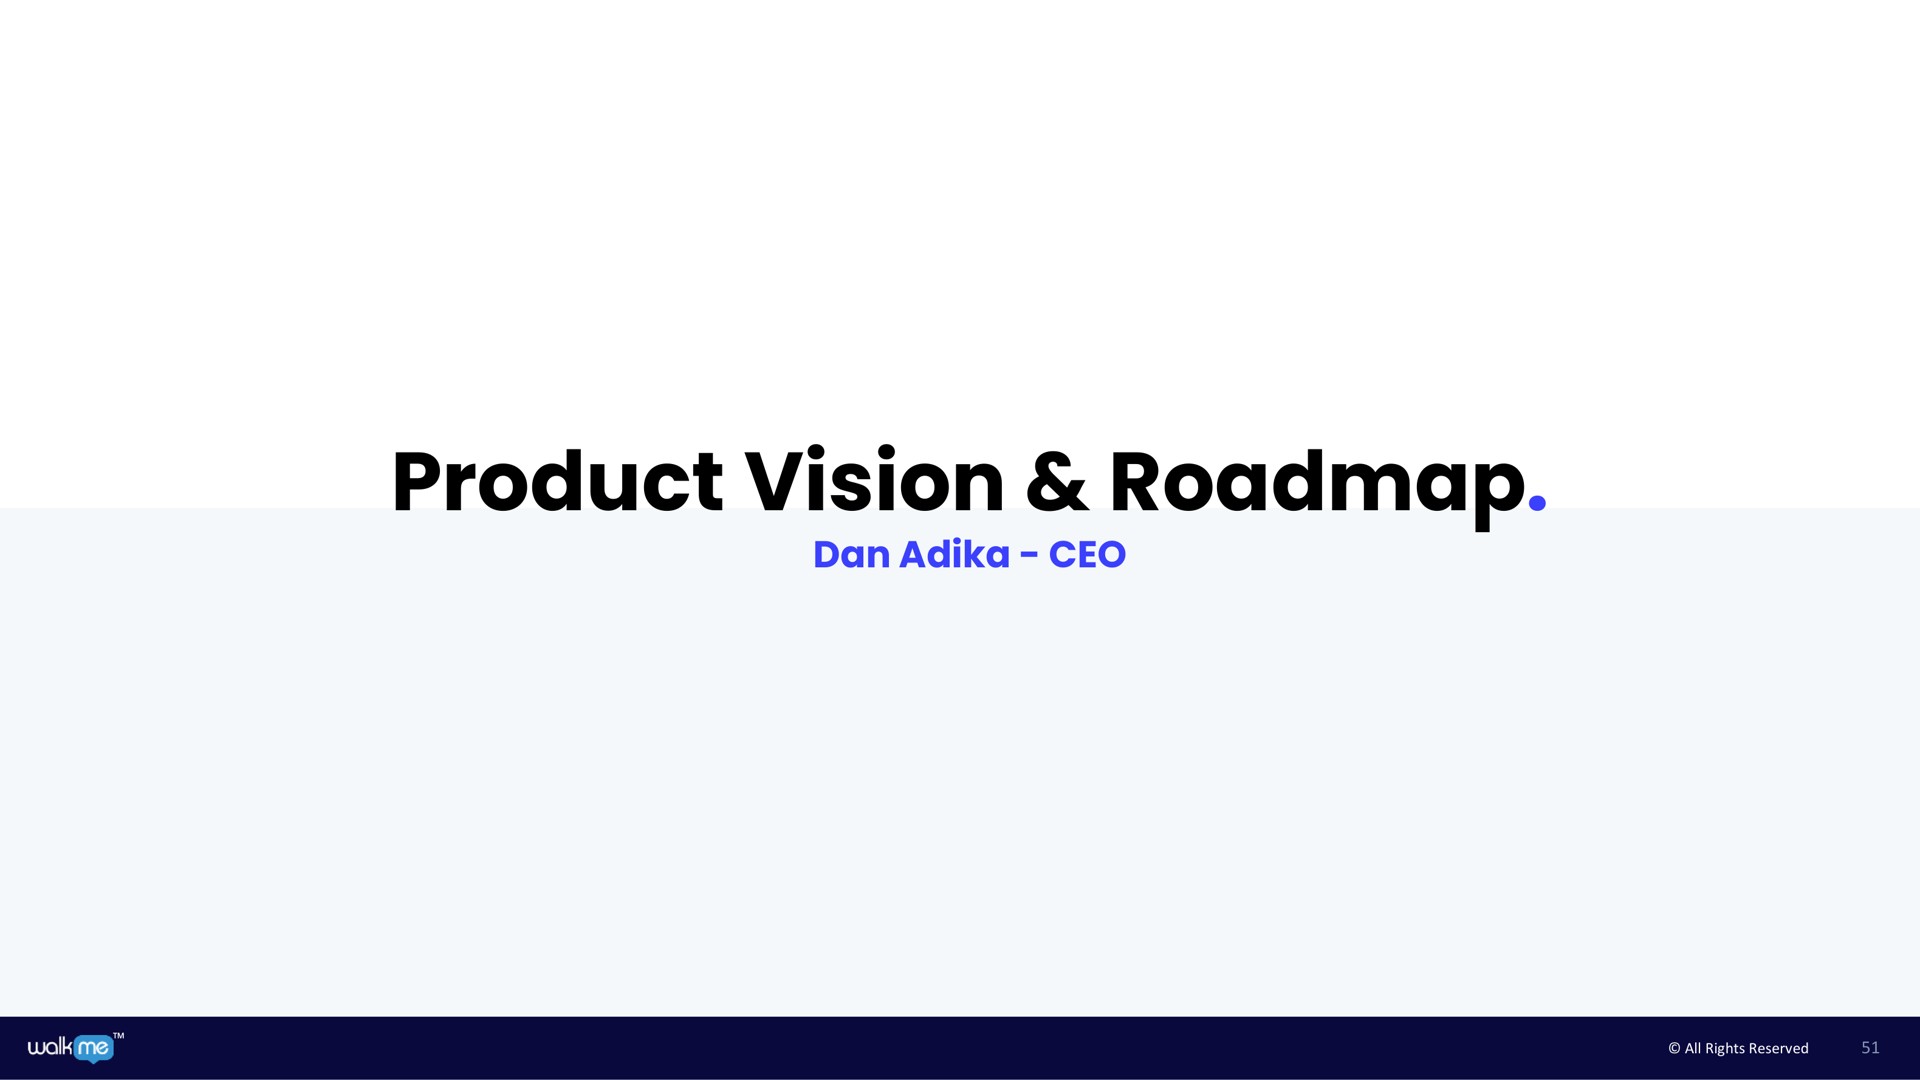 product vision | Walkme